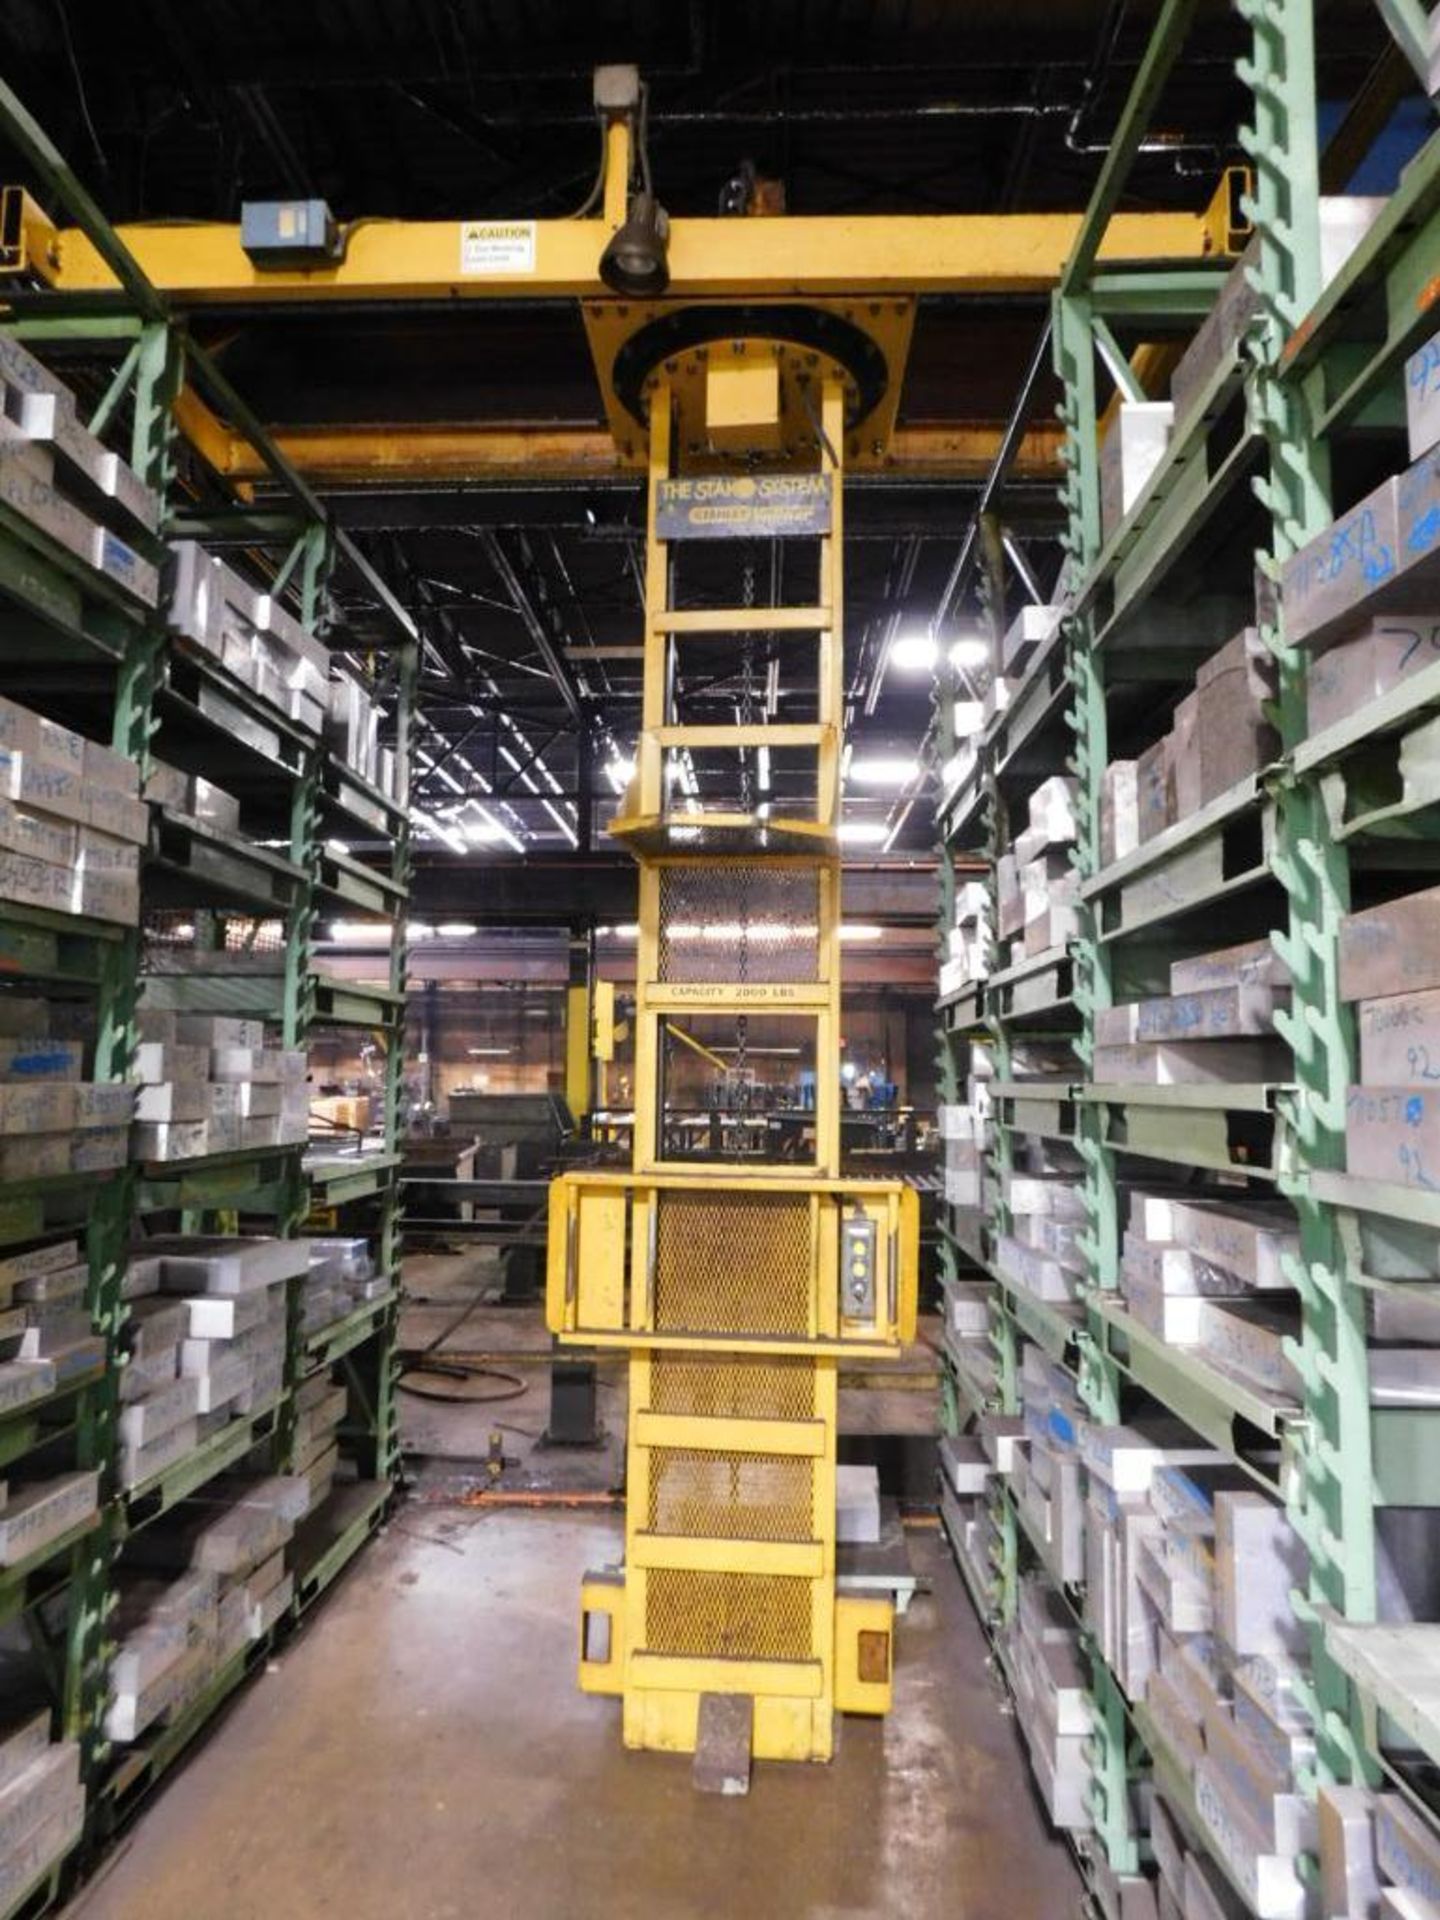 LOT: Vidmar Stak System Heavy Duty Steel Racking with Integrated Picker, 1-Ton Capacity (DELAYED REM